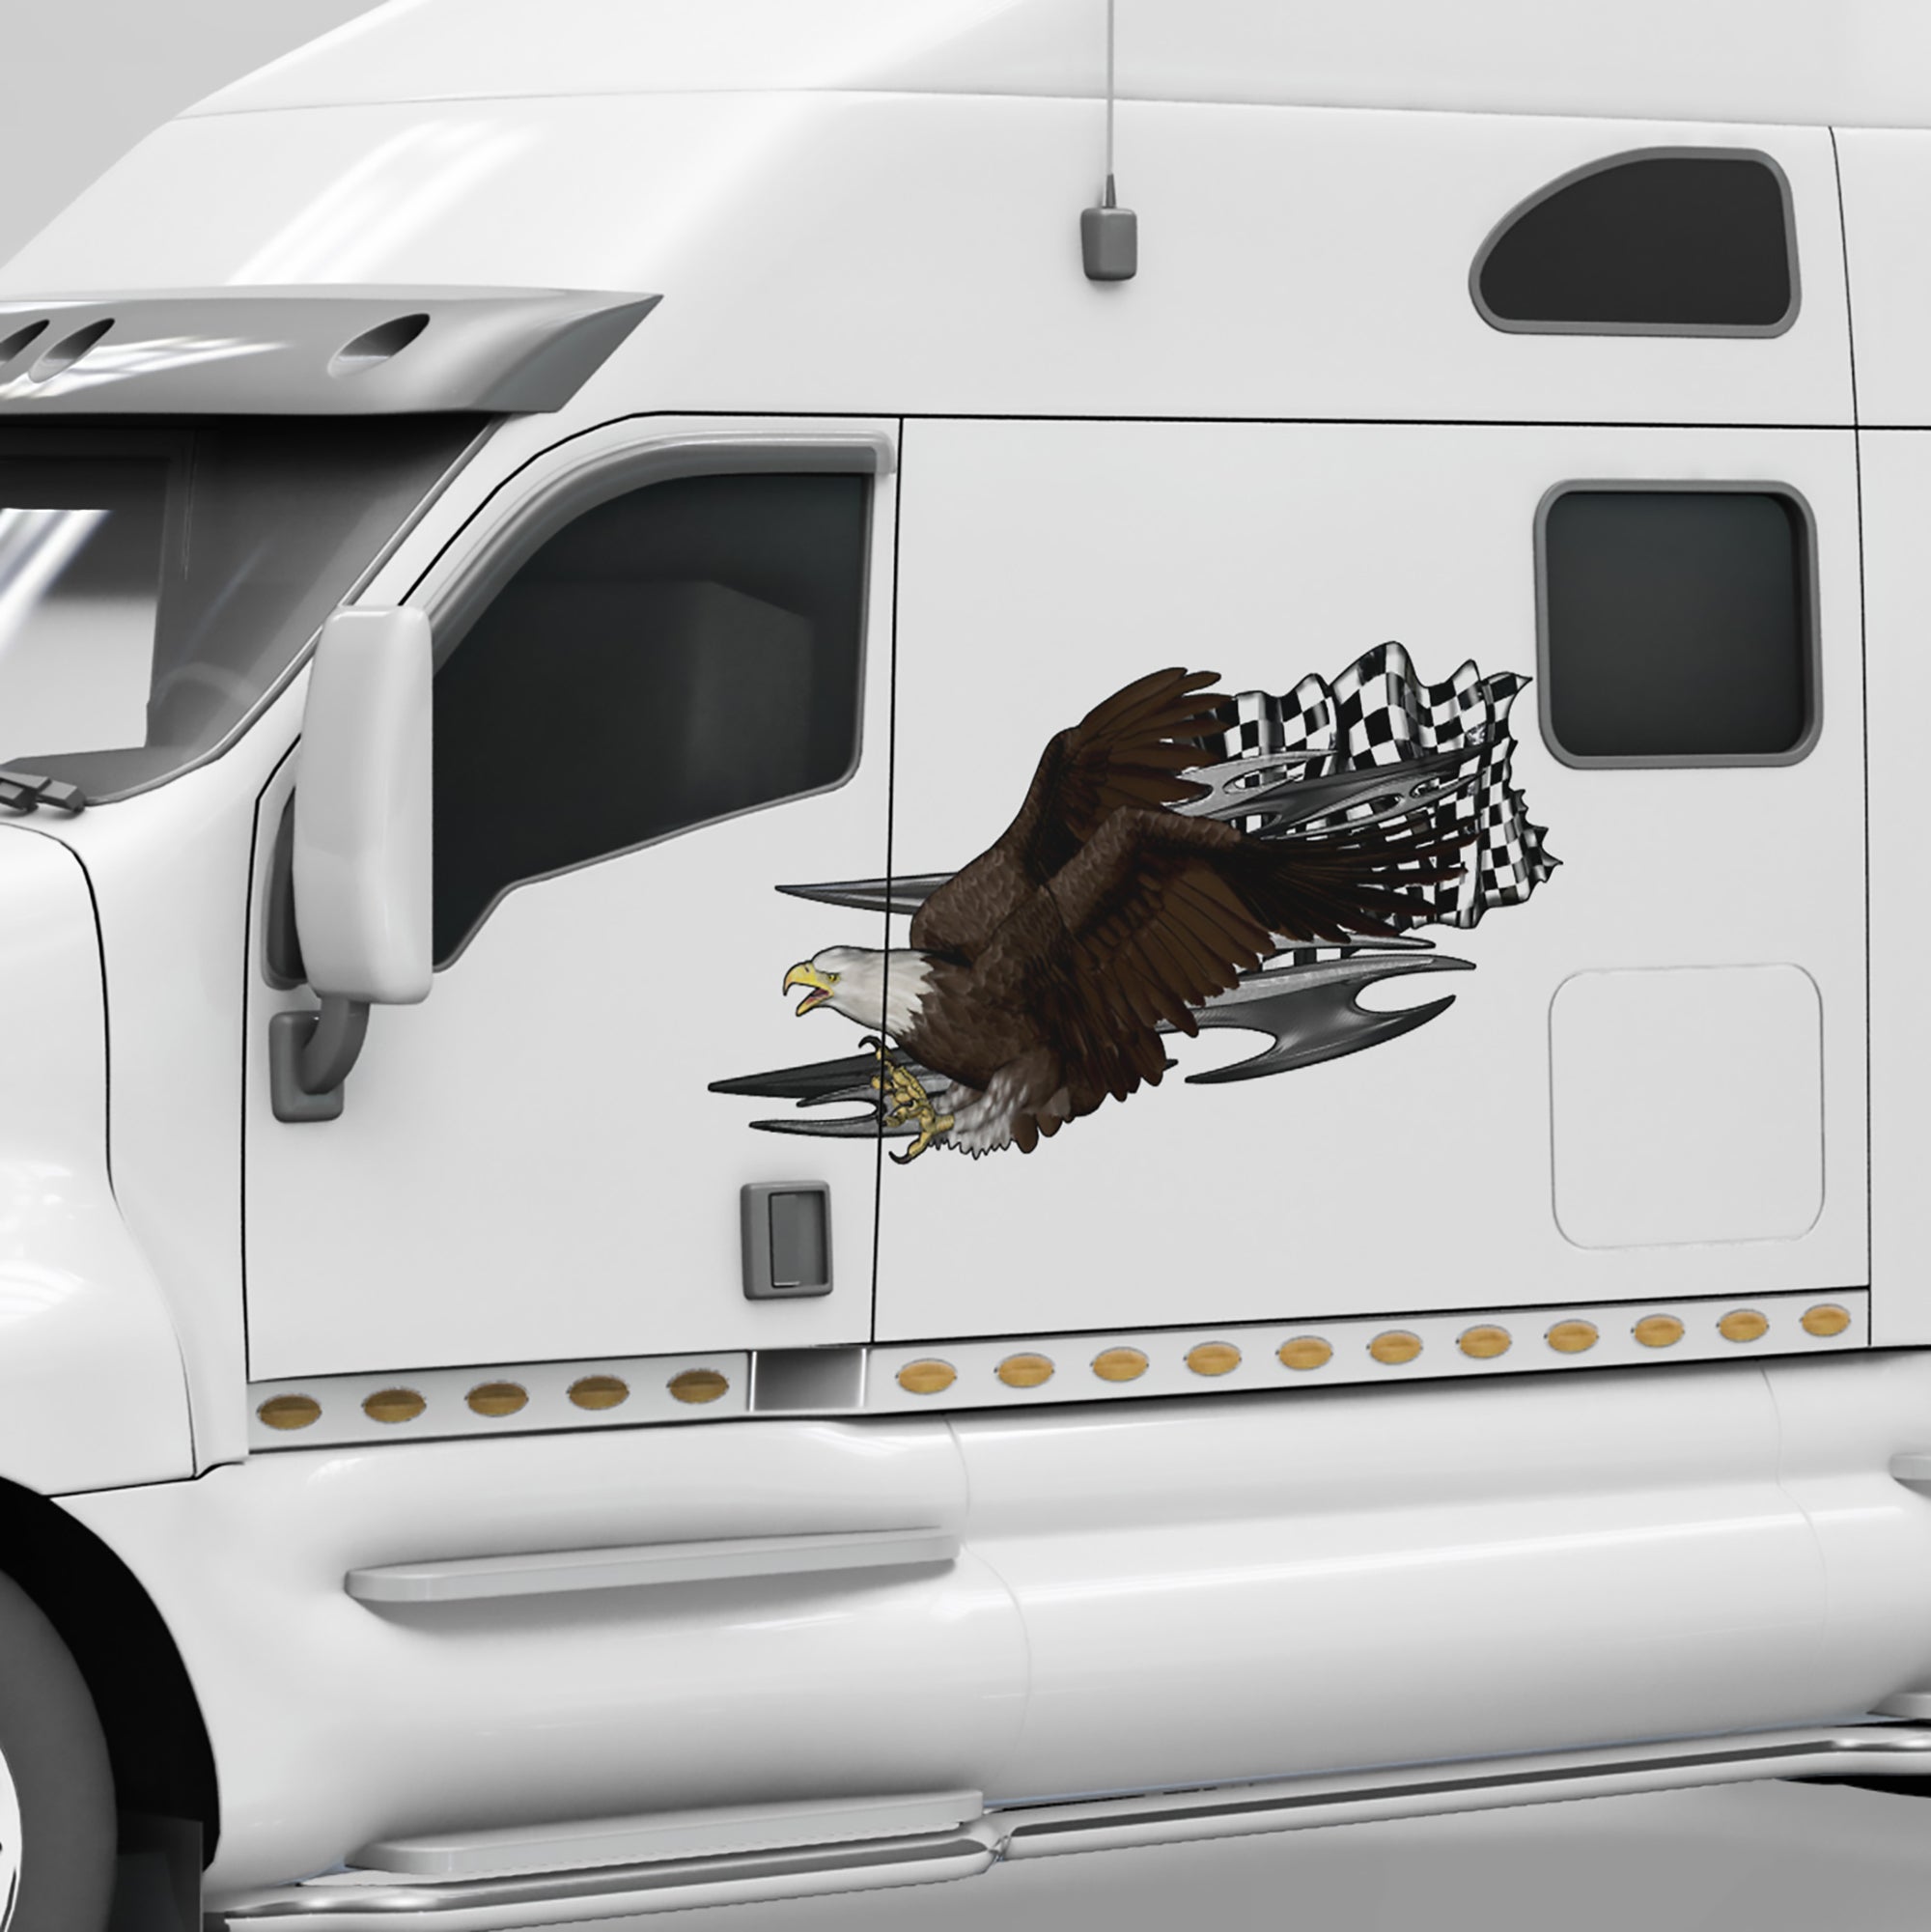 bald eagle with checkers vinyl graphics on the side of white semi truck